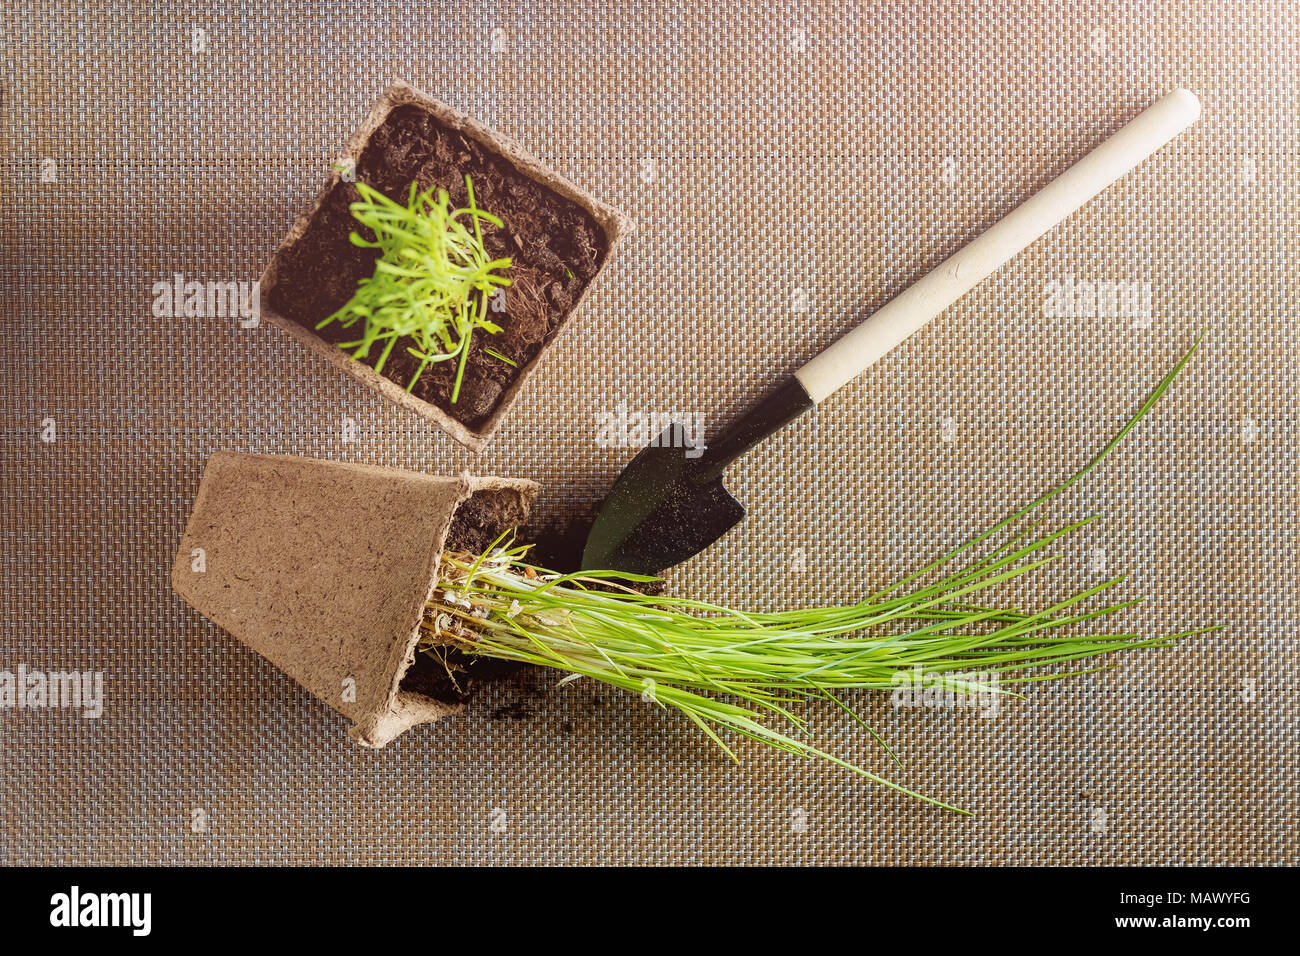 Preparing for Seasonal Transplantation of Plant. Product Still Life Image. Planting in Garden Concept. Top View, Stock Photo